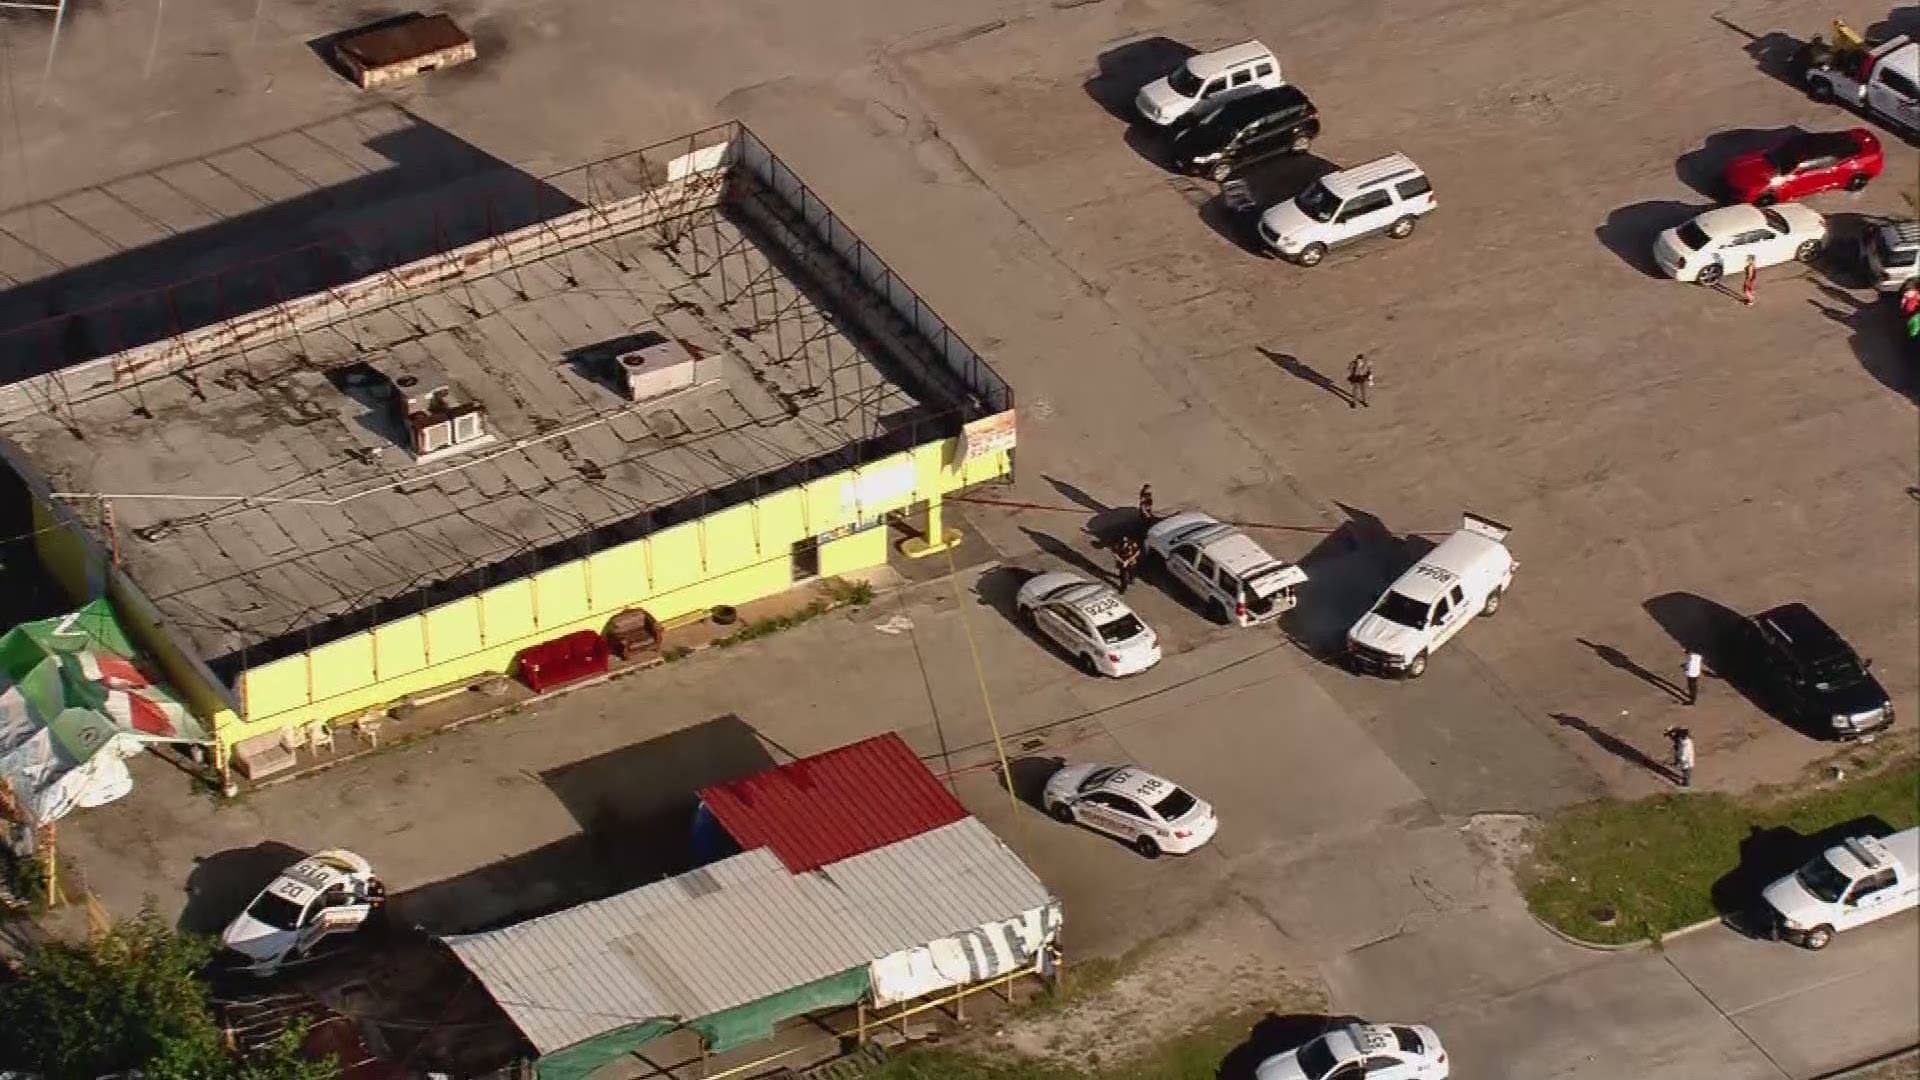 Deputies are investigating a homicide after a man was found dead inside an SUV at a car wash Wednesday morning. This happened just after 7:30 a.m. at the car wash located in the 4000 block of Aldine Mail Road in north Harris County.